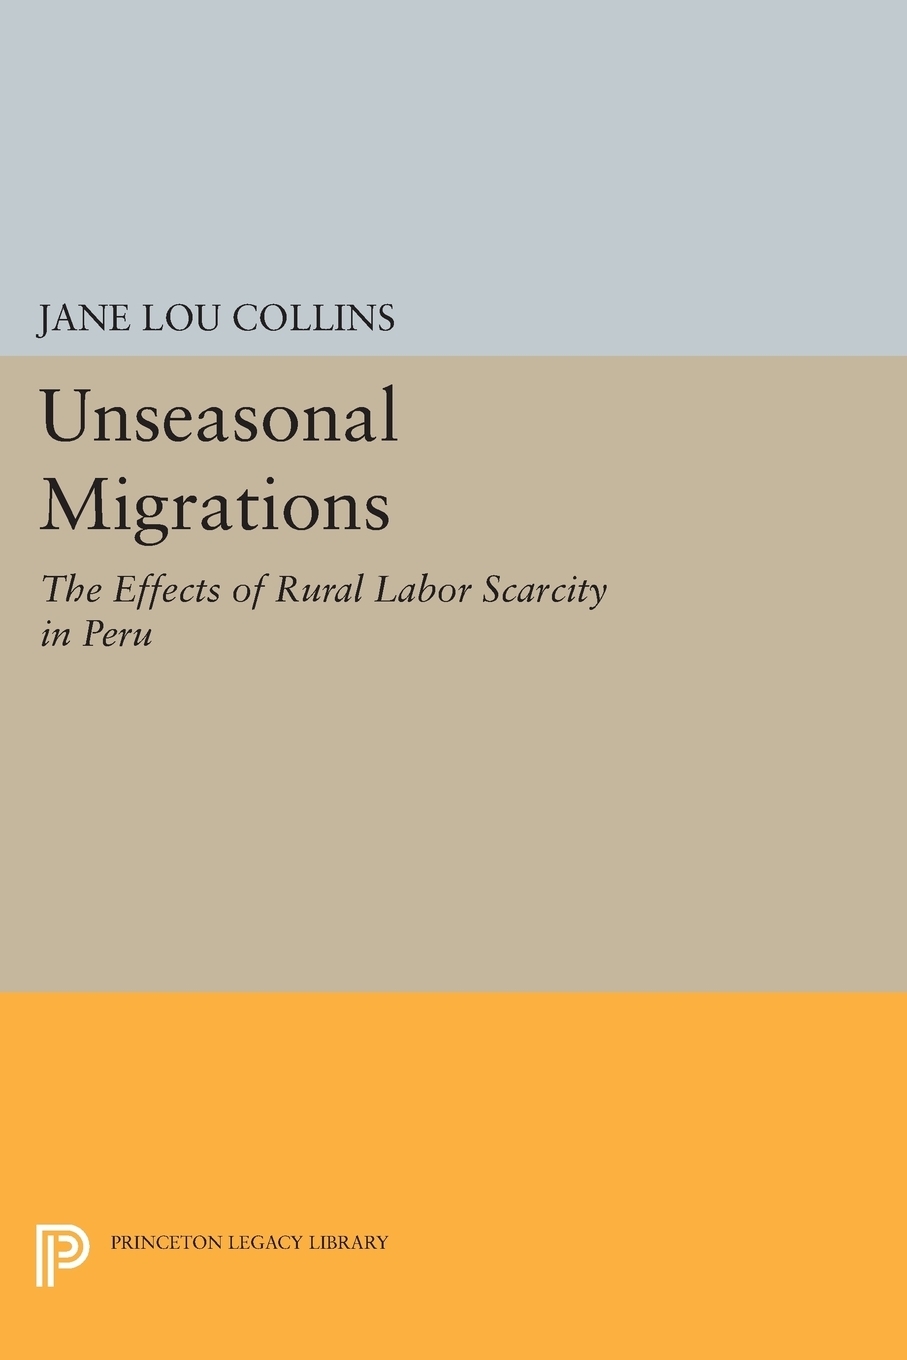 фото Unseasonal Migrations. The Effects of Rural Labor Scarcity in Peru